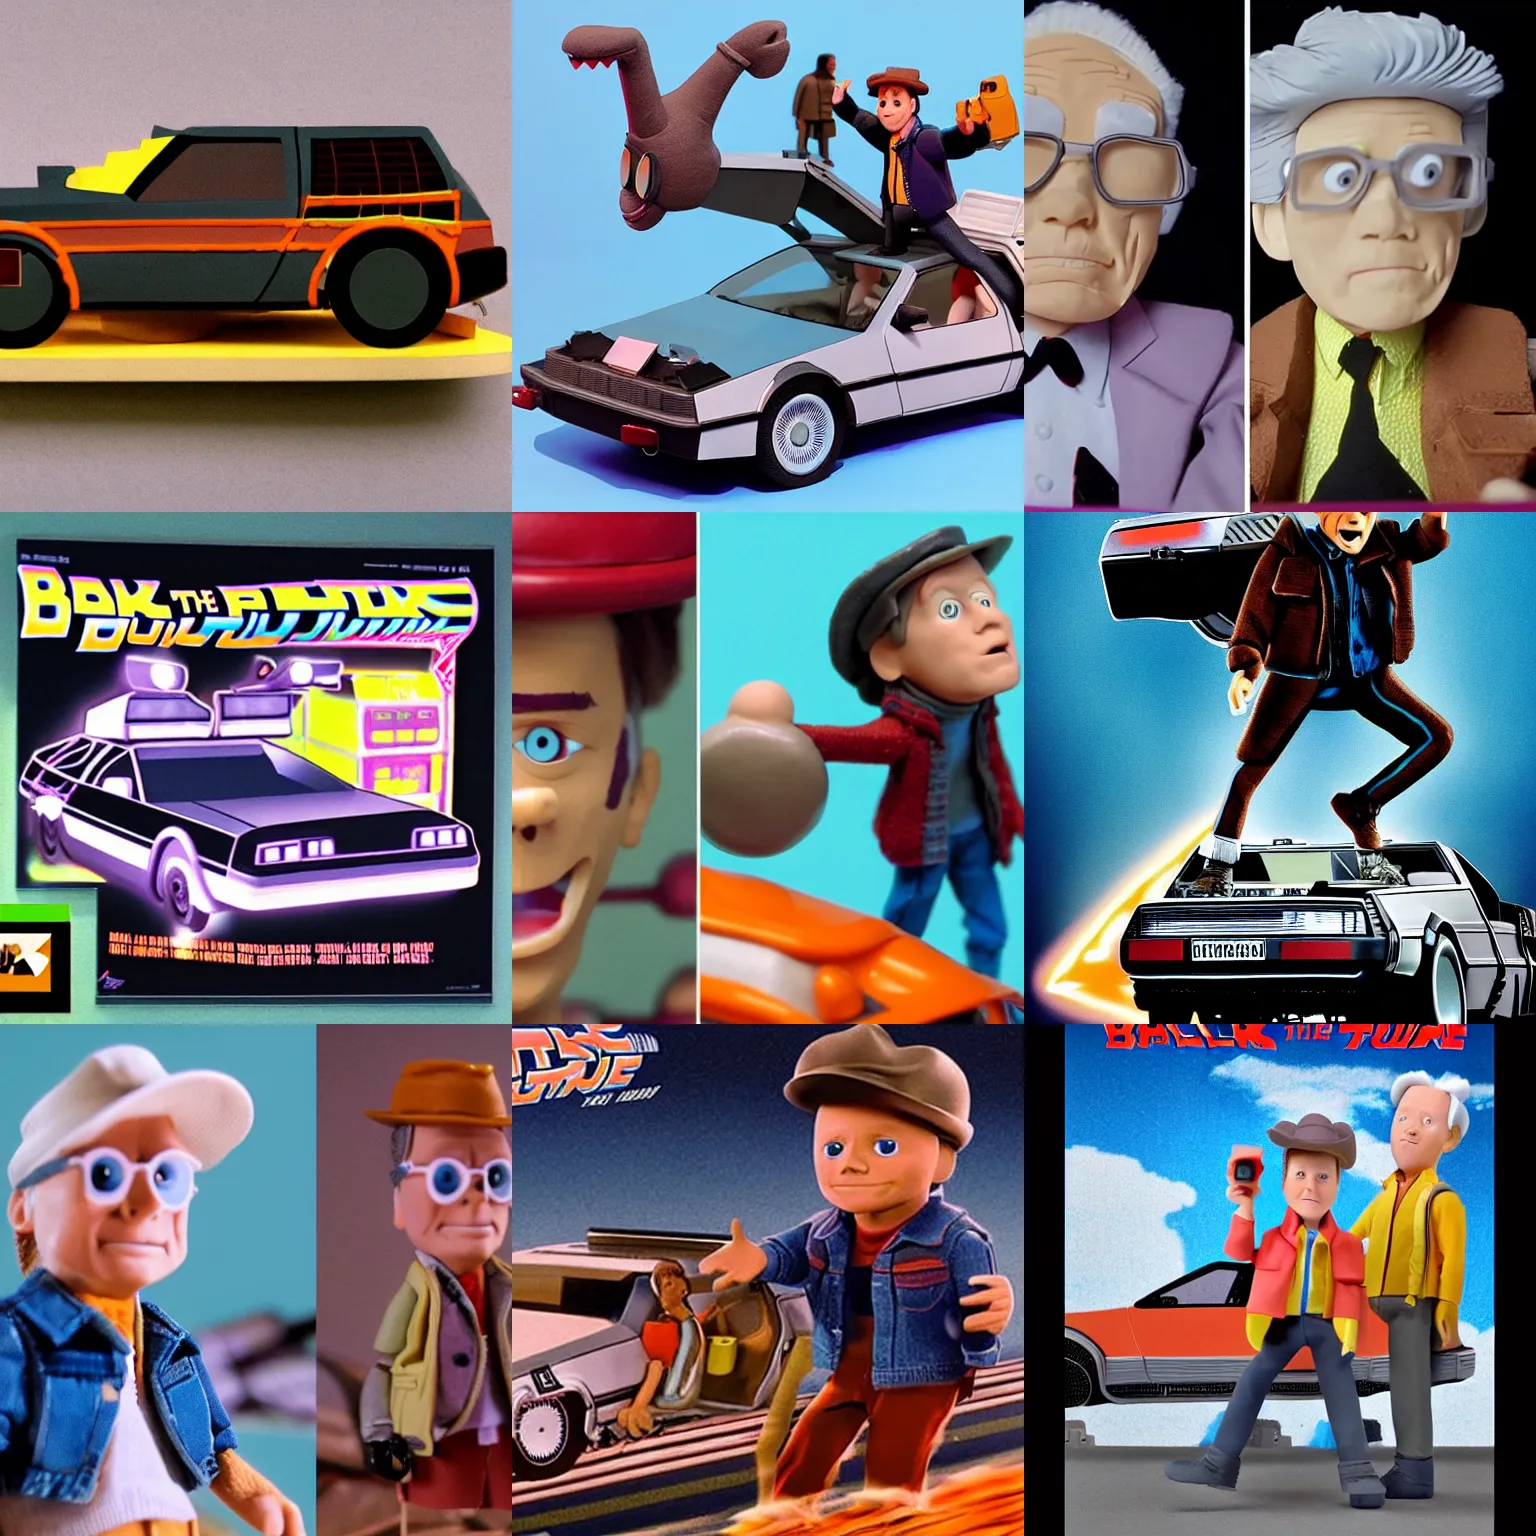 Prompt: The poster for the movie BACK TO THE FUTURE recreated with stopmotion clay animation style